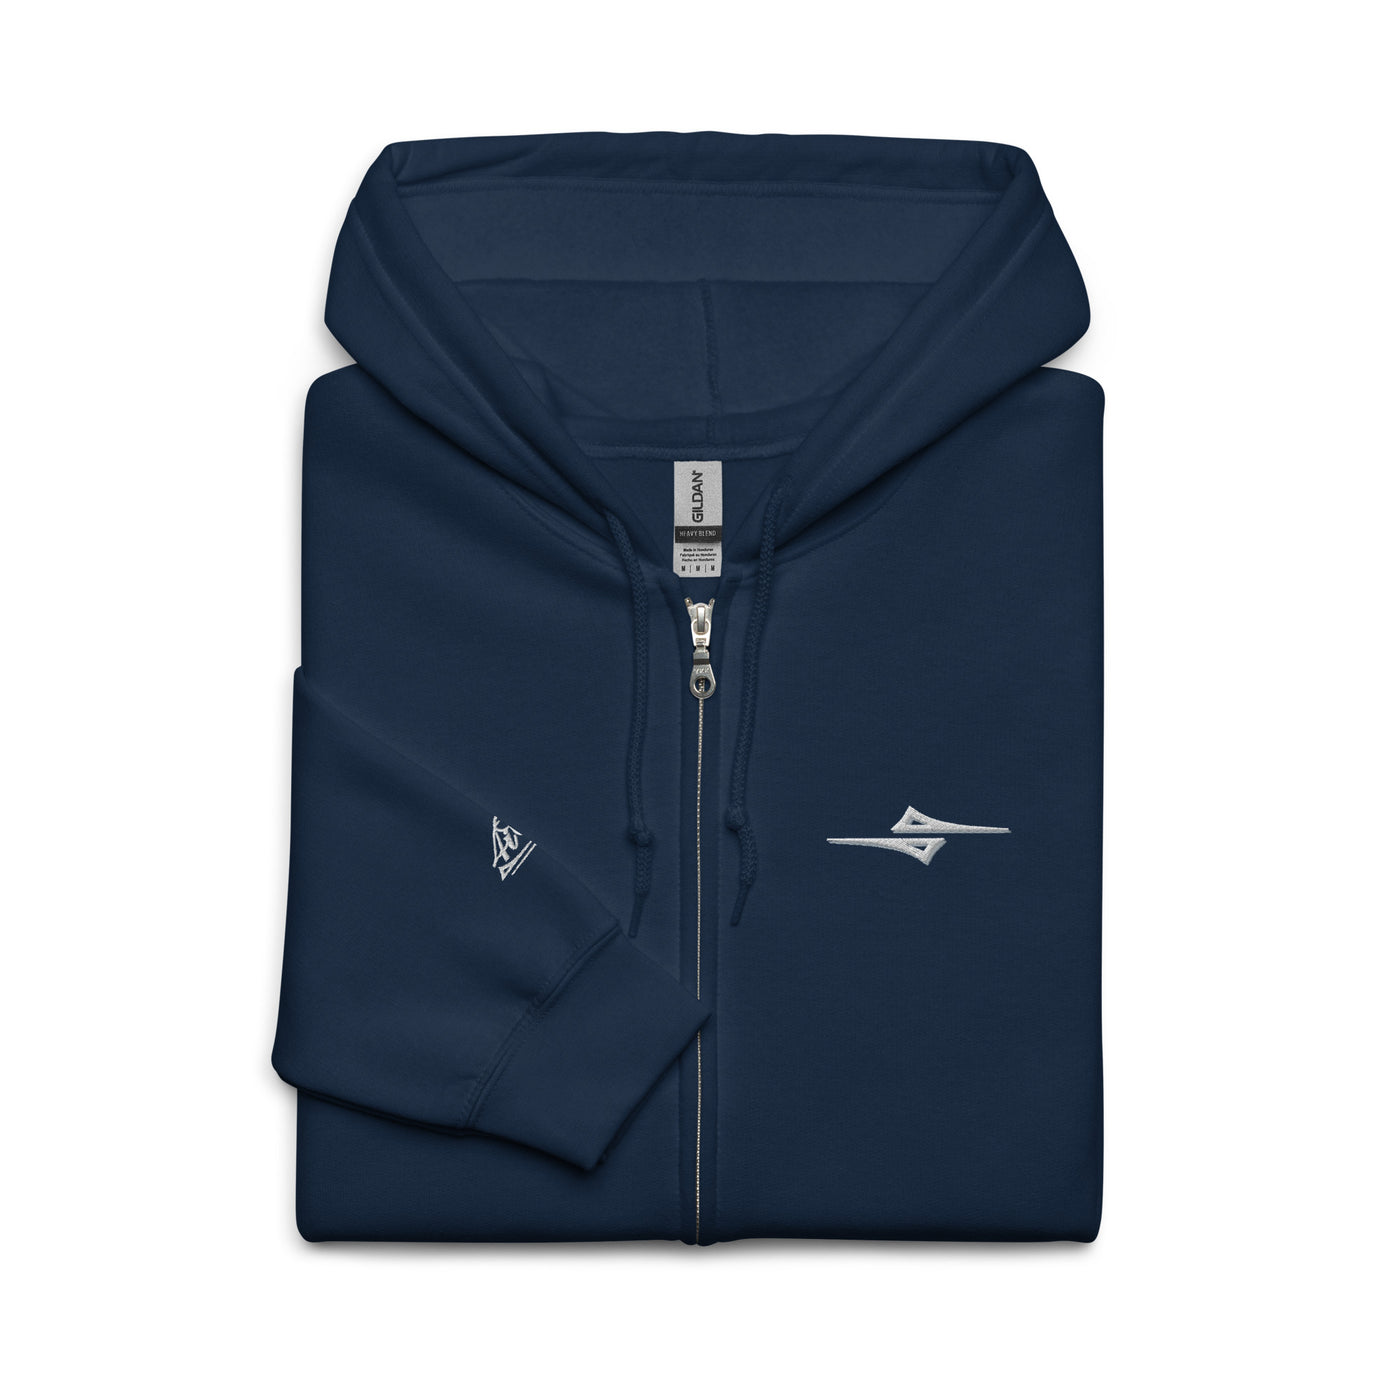  4iCe® Elite Boxing zip hoodie, navy front embroidery view